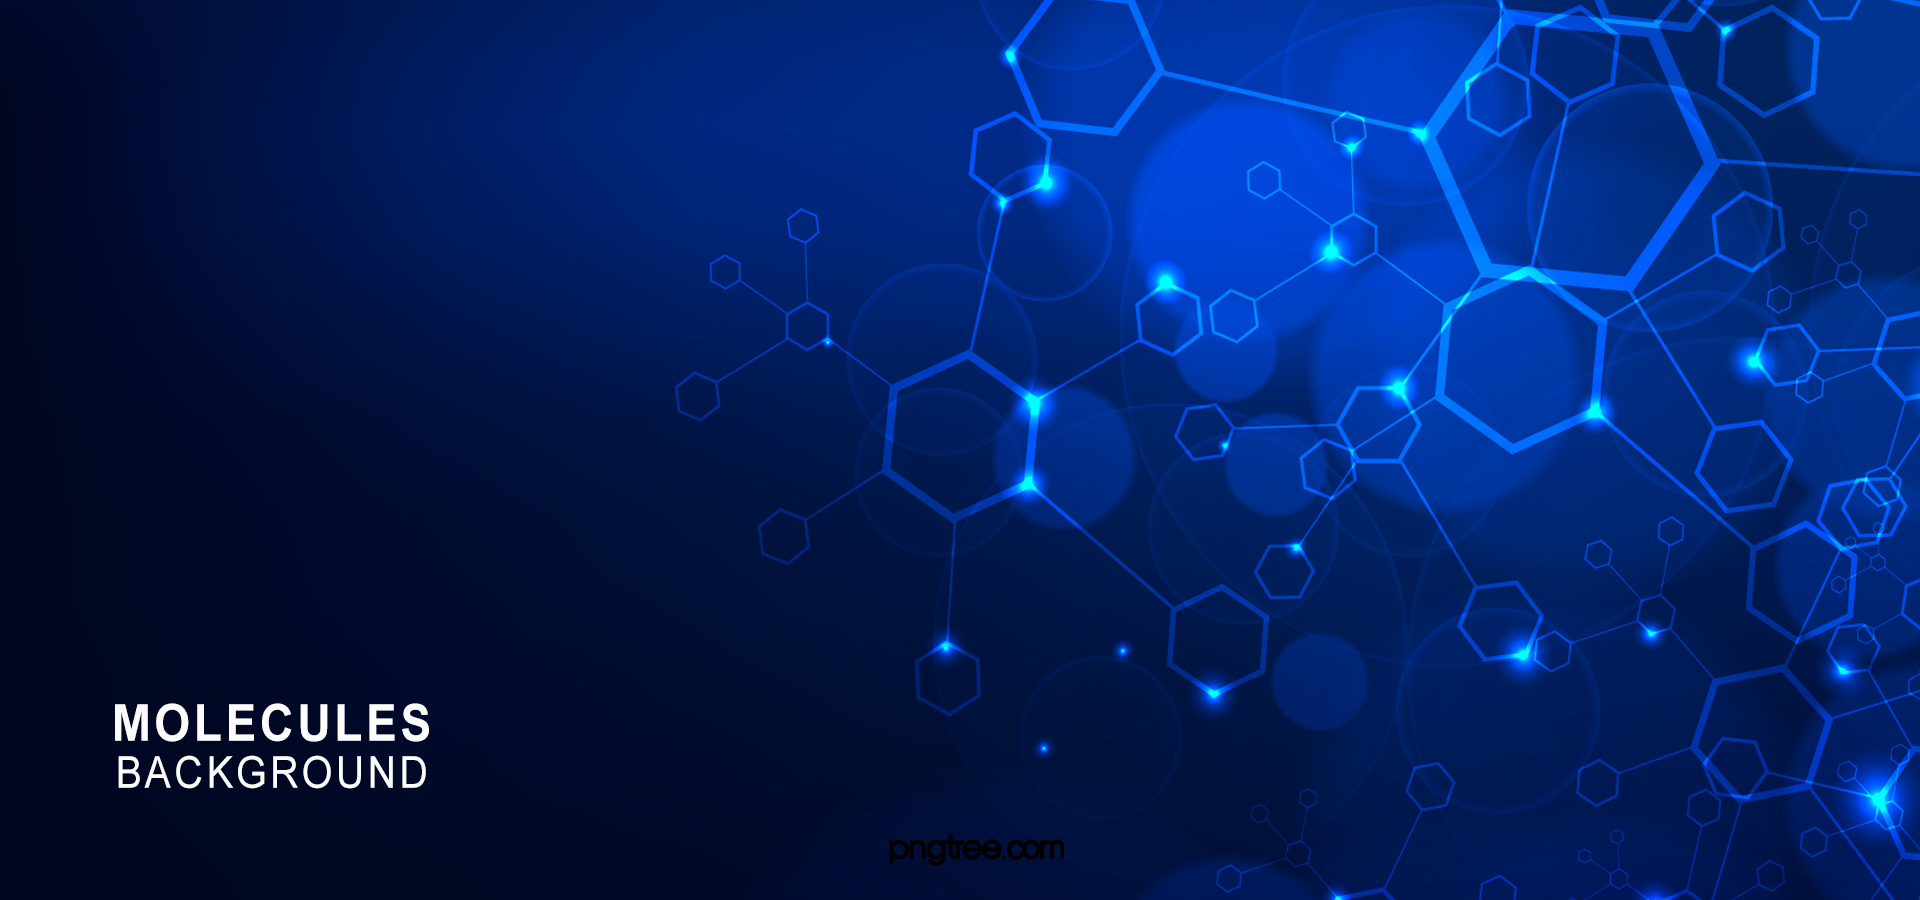 r127-—pngtree—blue-molecular-structure-technology-background1156656.png